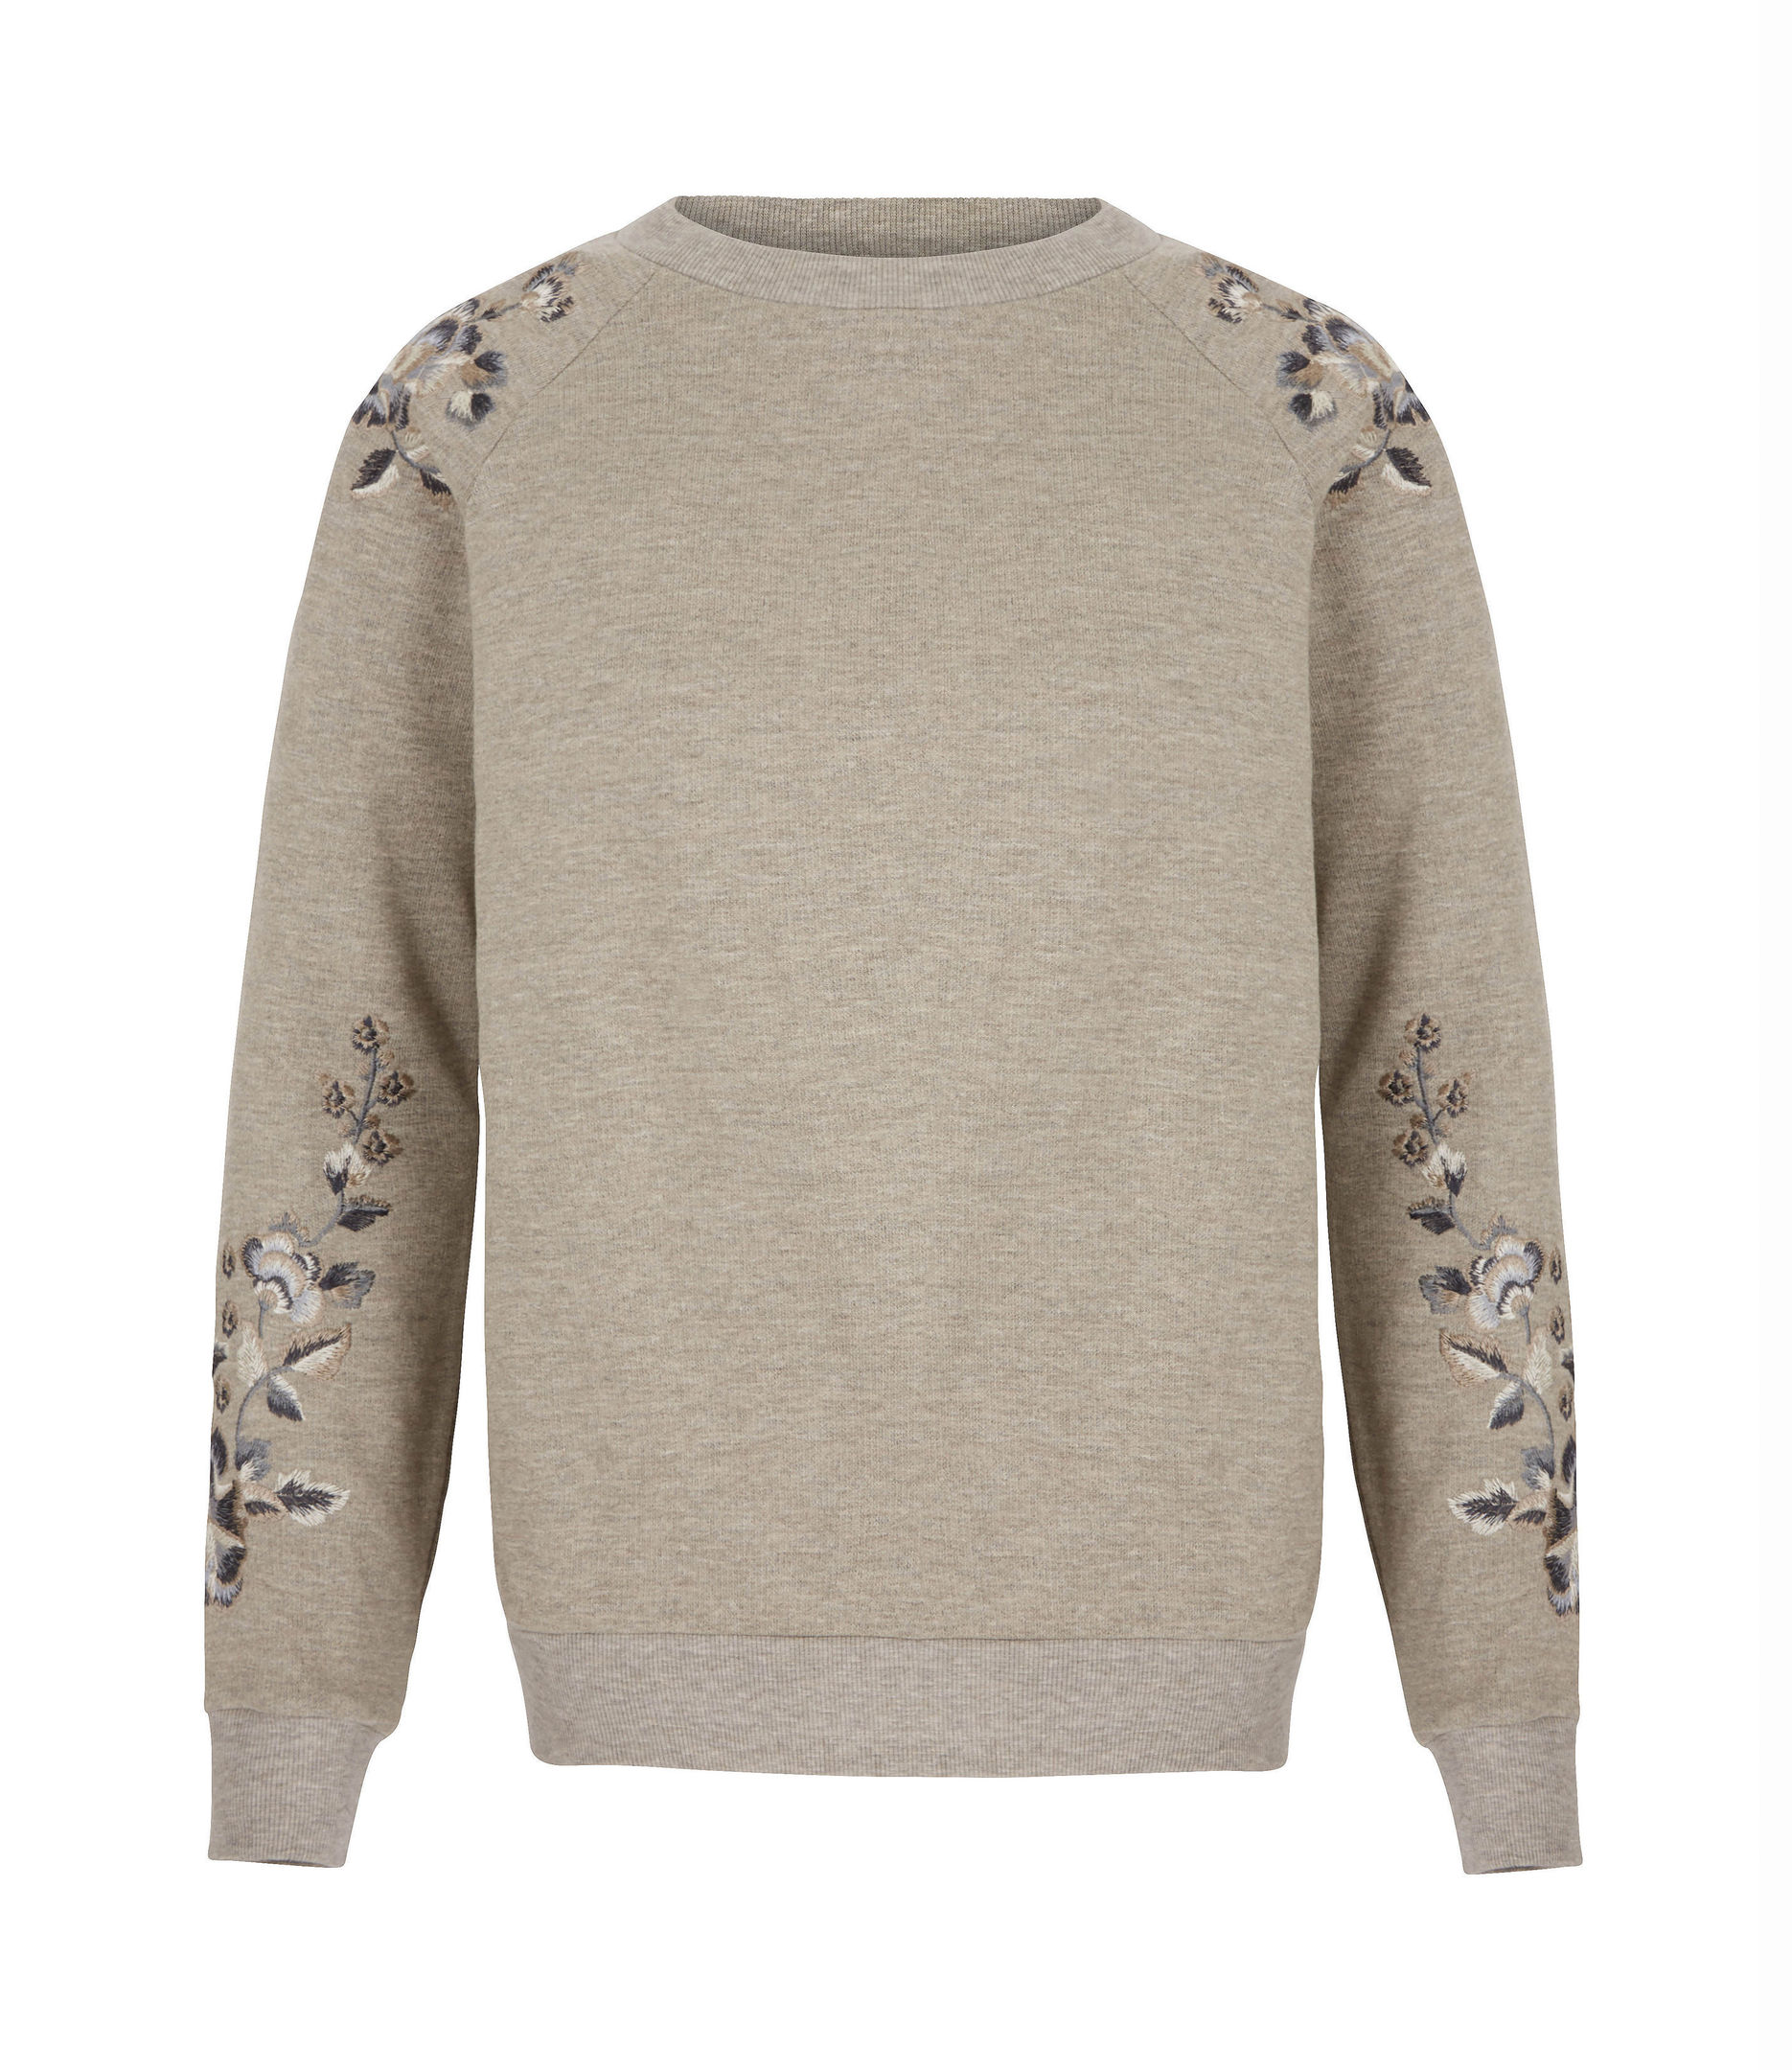  Next Embroidered Sweat Top, available from next.co.uk.